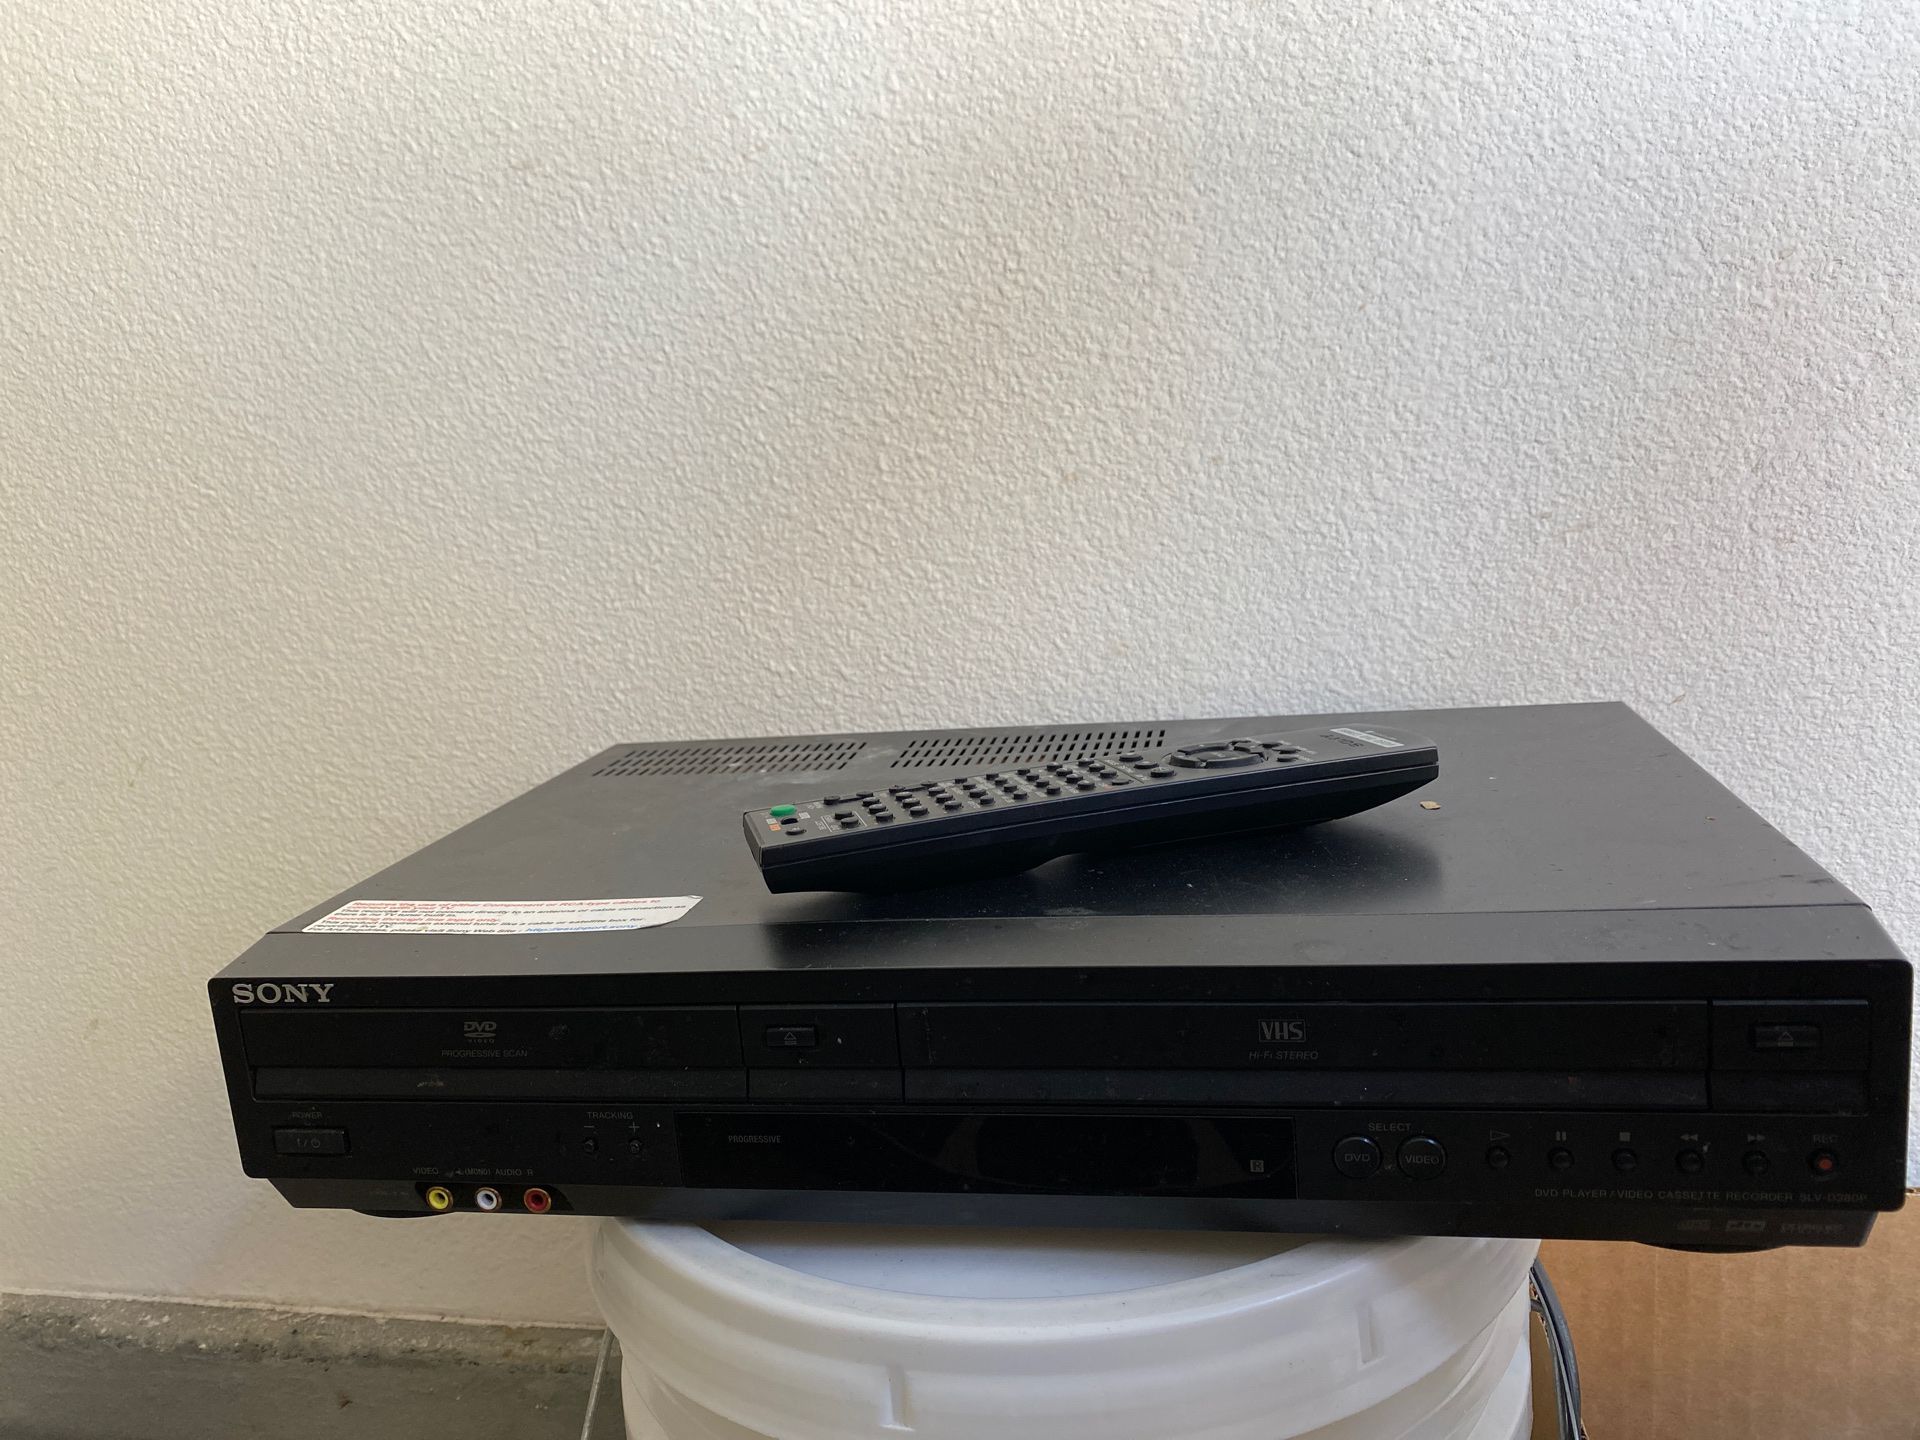 VHS DVD Sony player with remote